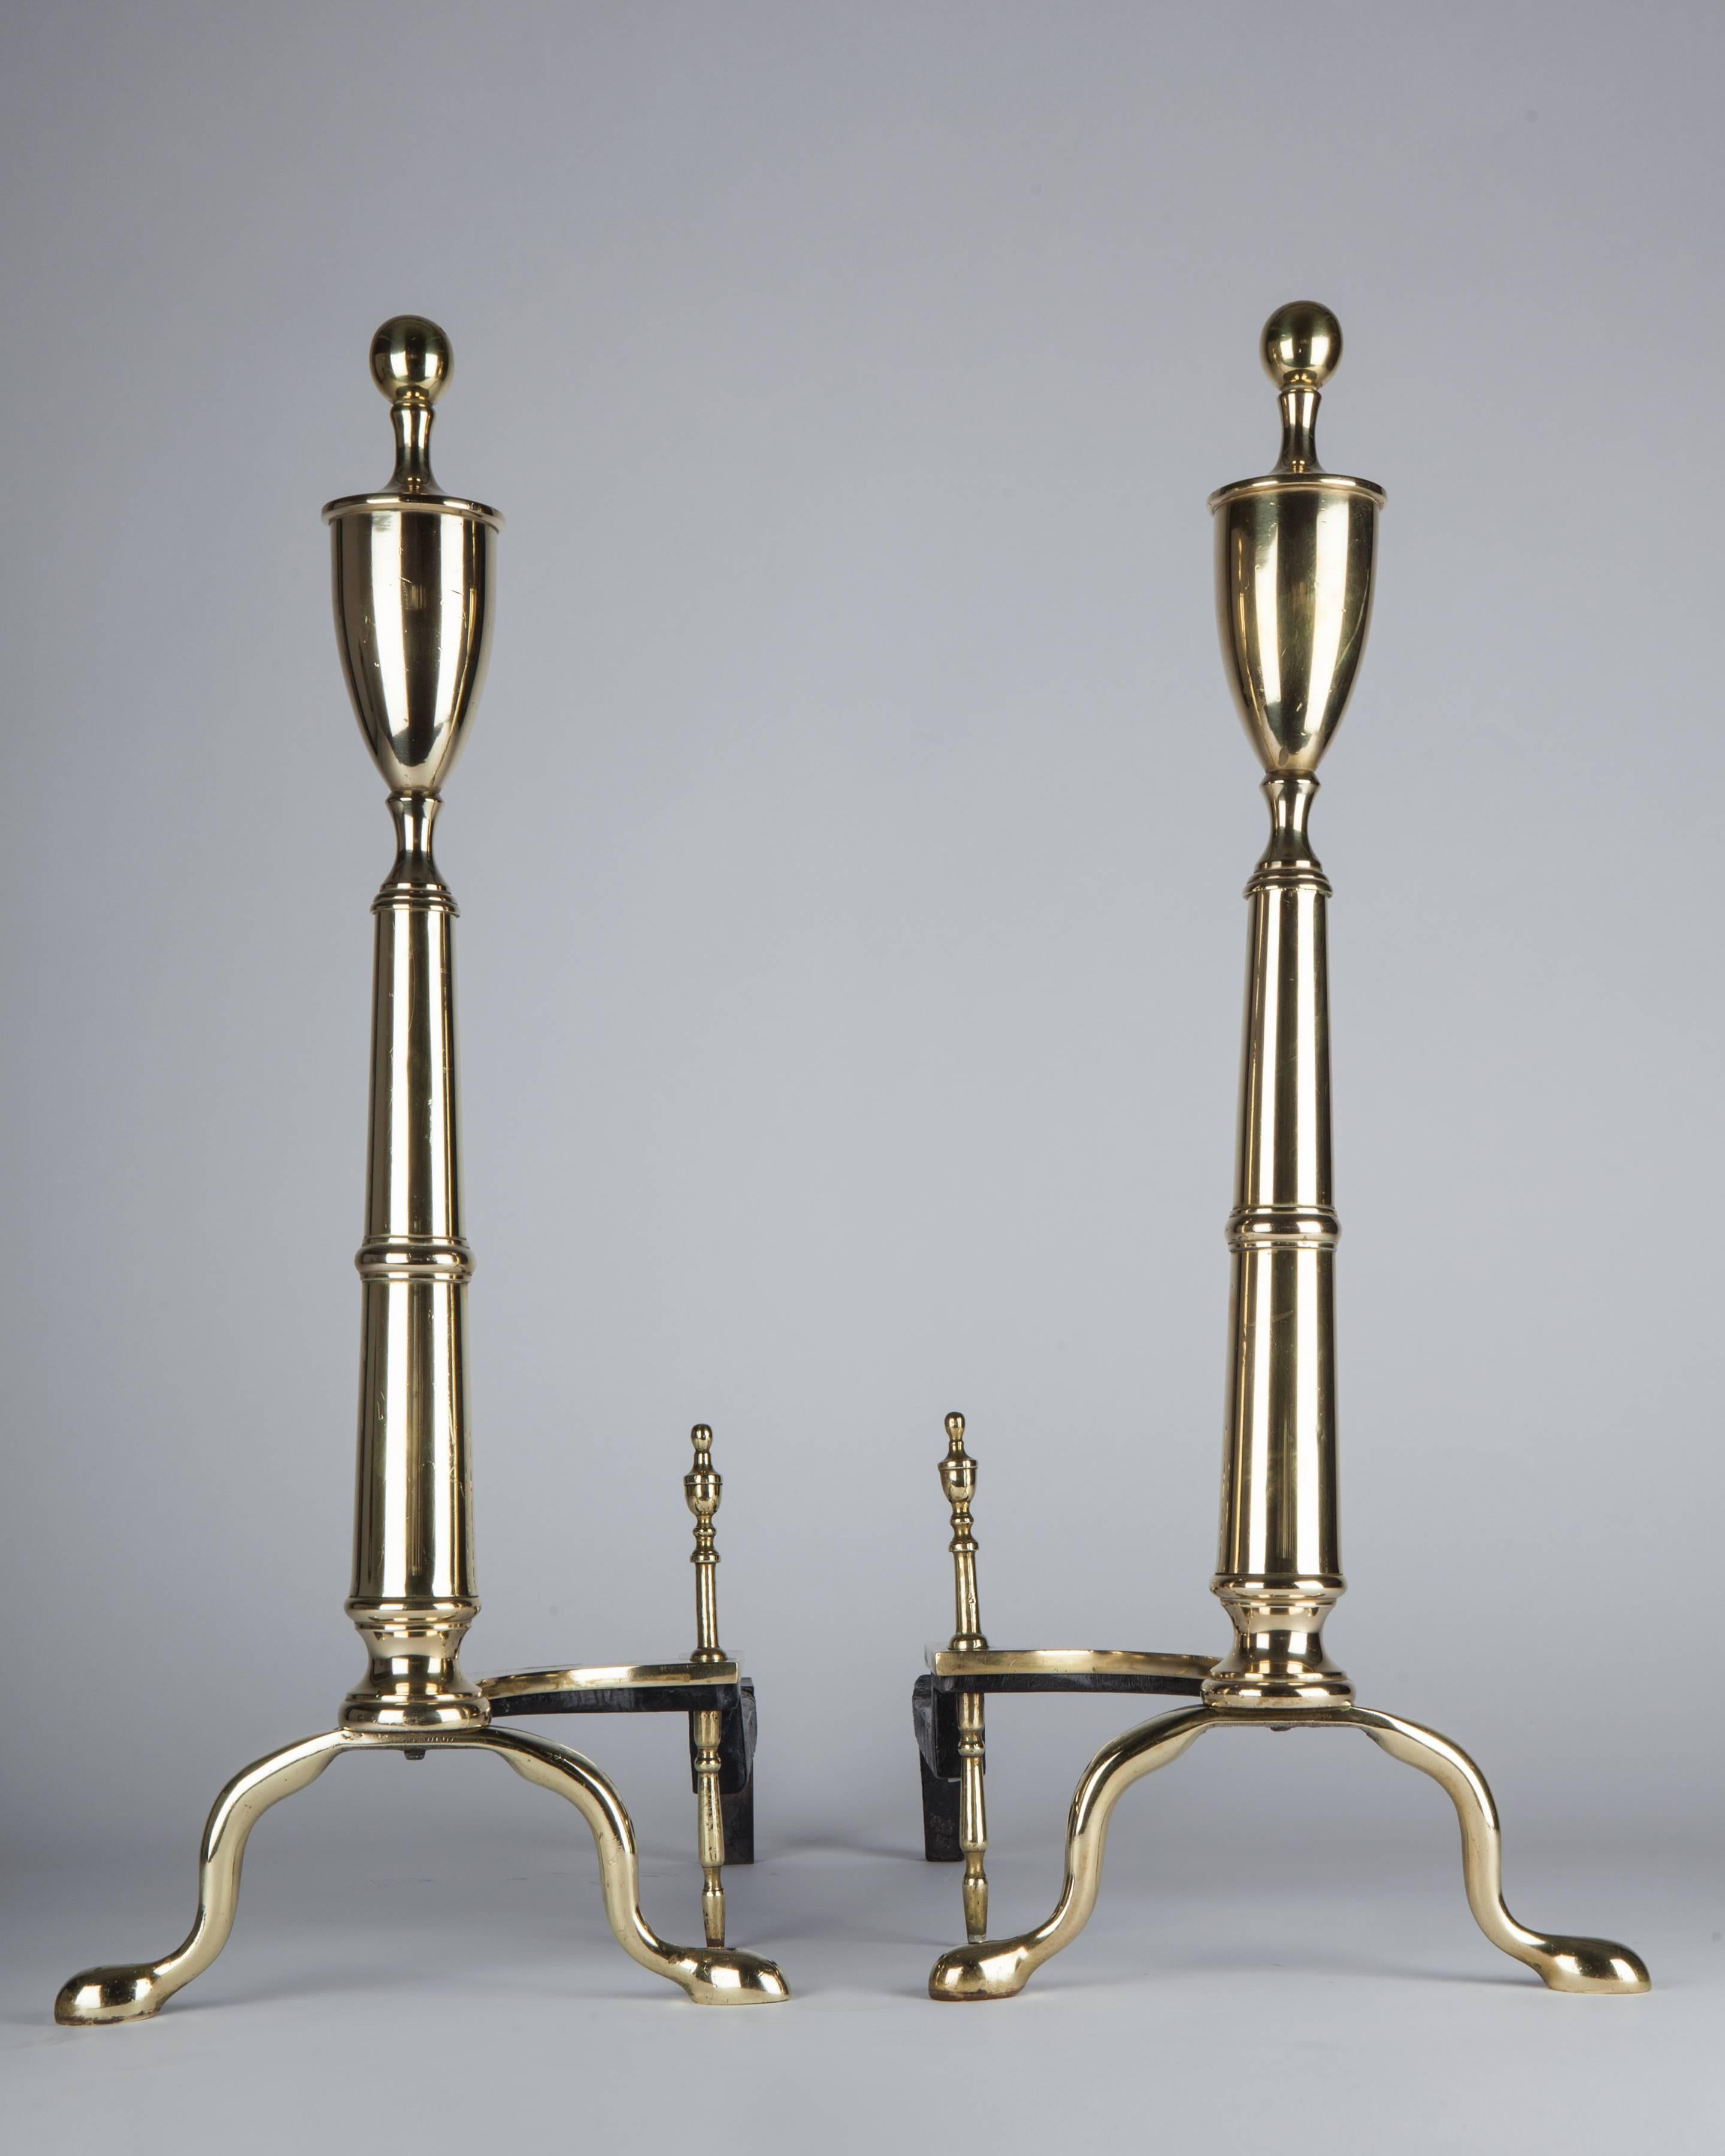 AFP0547 

A pair of antique brass andirons topped with urn finials and having pad feet in their original soft polished finish. Circa 1920s.

Dimensions: 
Overall: 24-1/2